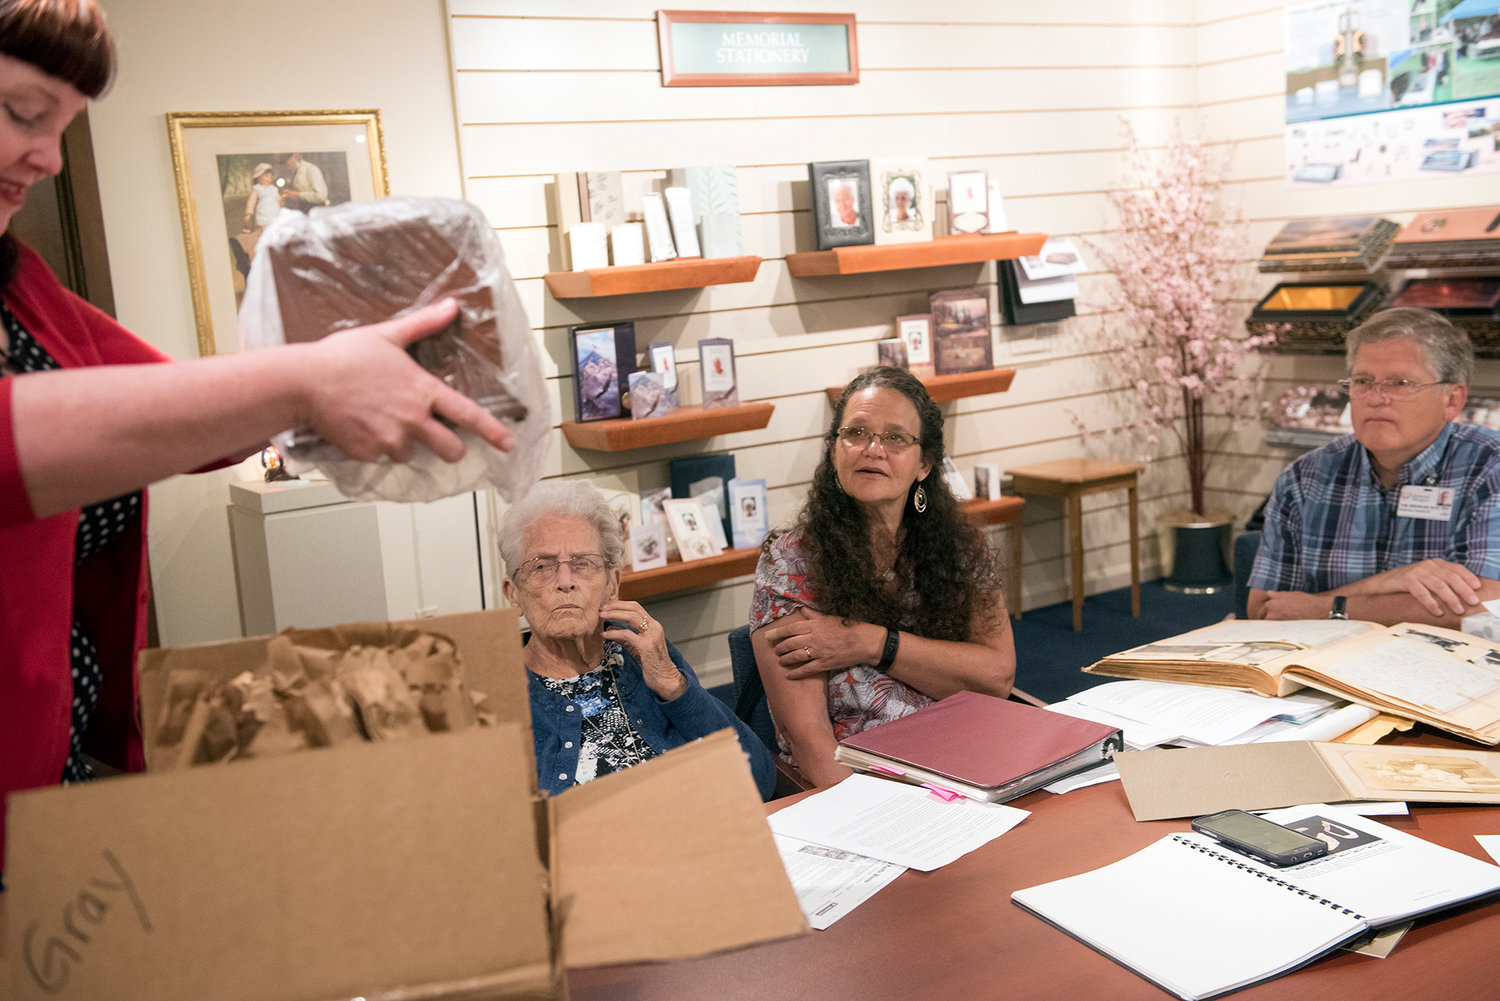 Jeanne Louvier, left-center, her daughter, Jan Bradshaw, and son-in-law Tom Bradshaw look on Malynda Wilson, left, the intern funeral director at Brown Mortuary Service, unpacks the urn that will hold the remains of William "Bill" James Gray, Jr., Louvier’s brother, on Friday, July 7, 2017, in Centralia. Army Air Force 1st Lt. William “Bill” James Gray, Jr. died while serving in Germany on April 16, 1945. The Defense POW/MIA Accounting Agency recently accounted for his remains. He will be buried on Friday, July 14, at Tahoma National Cemetery in Kent, Wash.